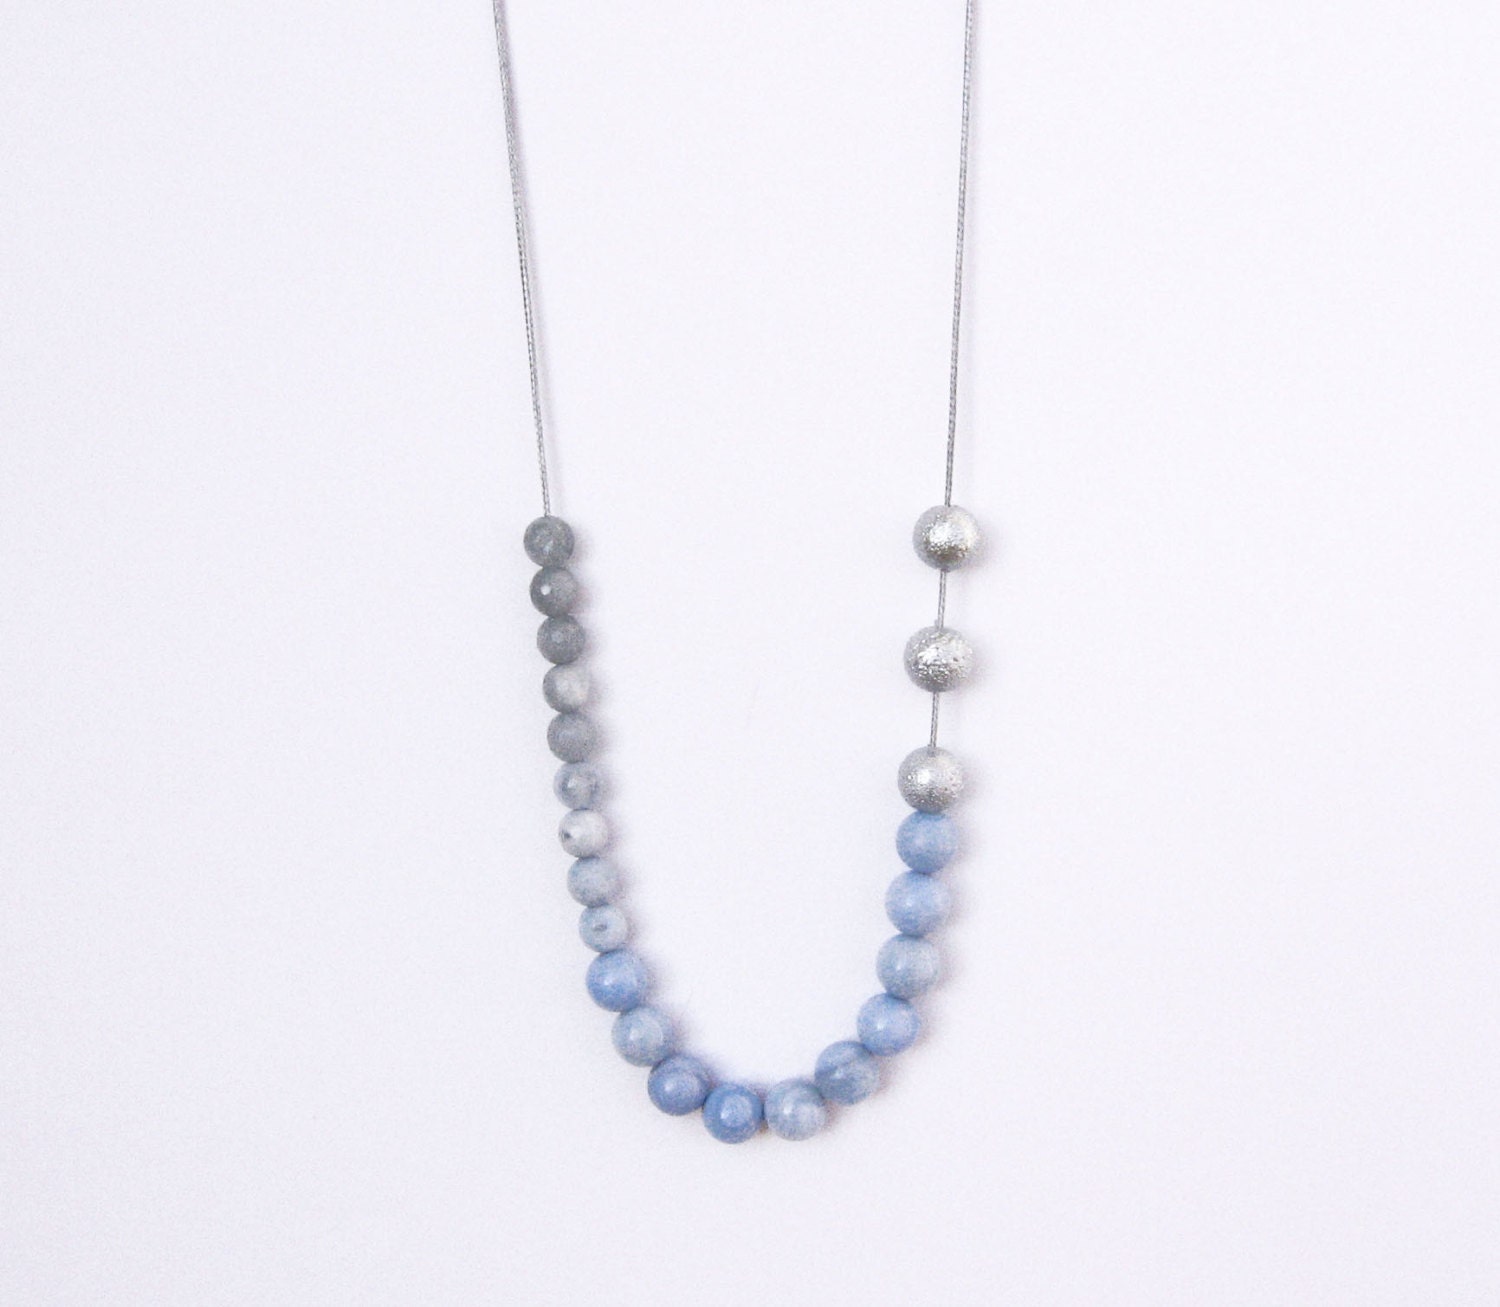 Sky Blue Agate Necklace / Stacking Necklace / Gemstone Necklace - DiaStyle